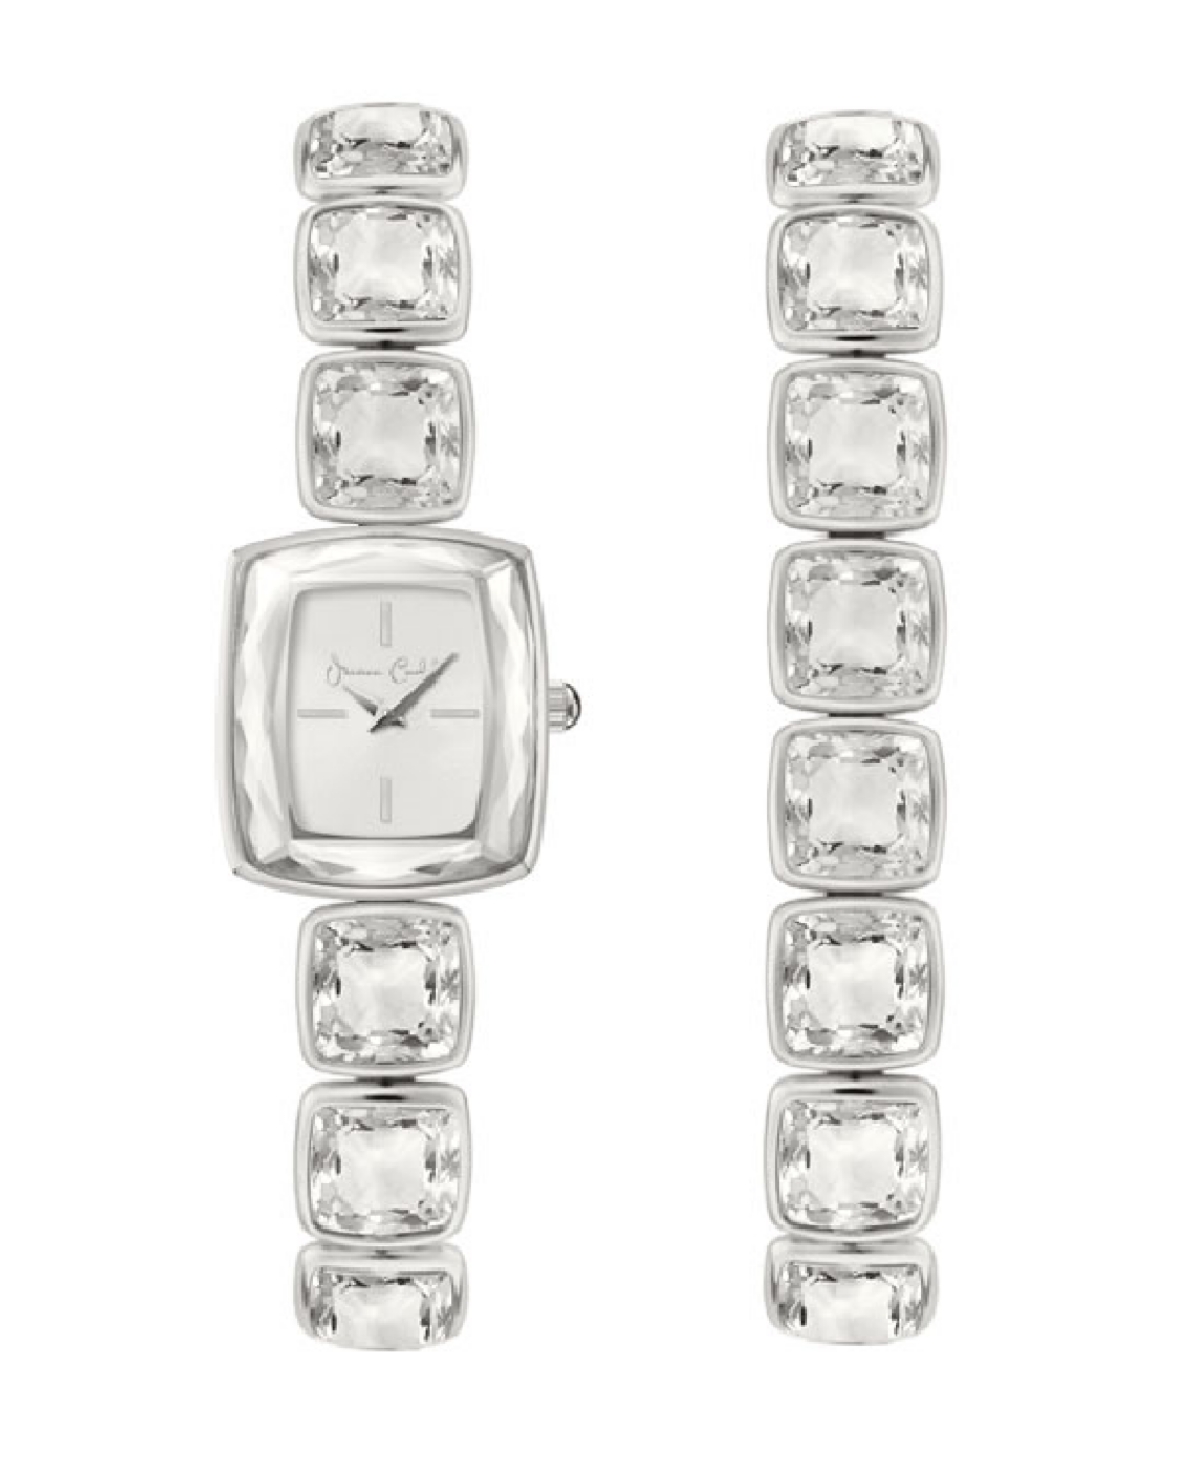 Jessica Carlyle Women's Quartz Silver-tone Alloy Watch 18mm Gift Set In Shiny Silver,light Silver Sunray